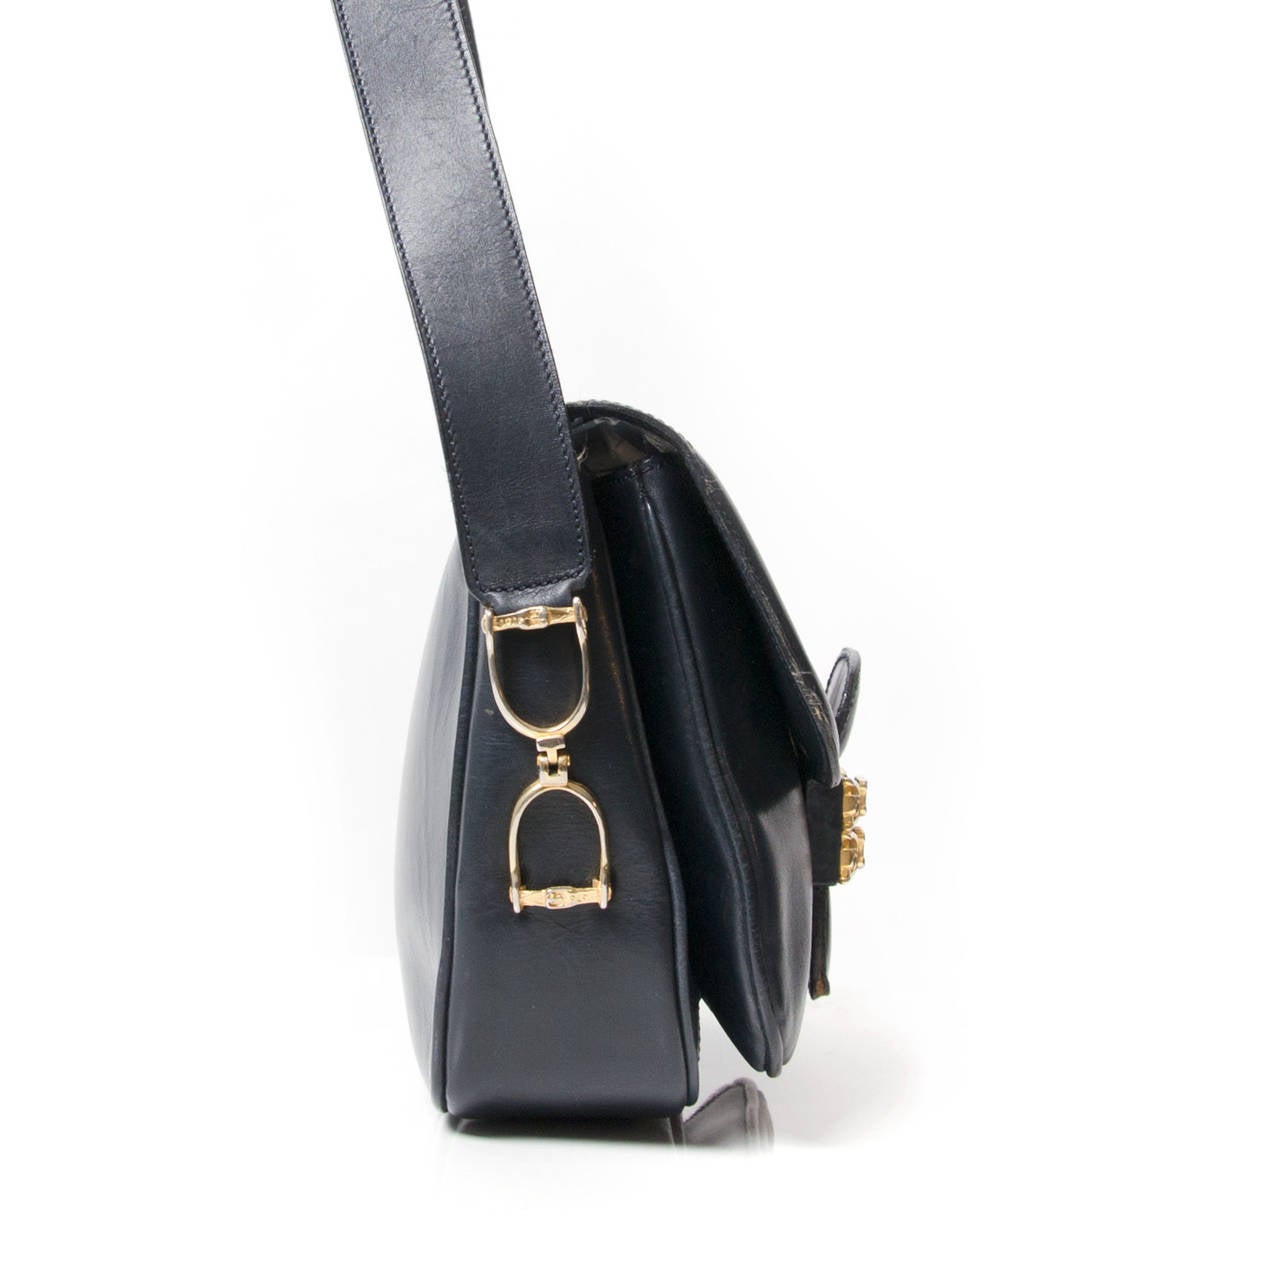 Celine Dark Blue Carriage Buckle Bag.Vintage Delvaux Red 'Tissage Côtelé' Cross Body Bag. Buy and sell authentic secondhand Delvaux bags at the right price at LabelLOV vintage webshop. Safe and secure online shopping. Koop authentieke tweedehands